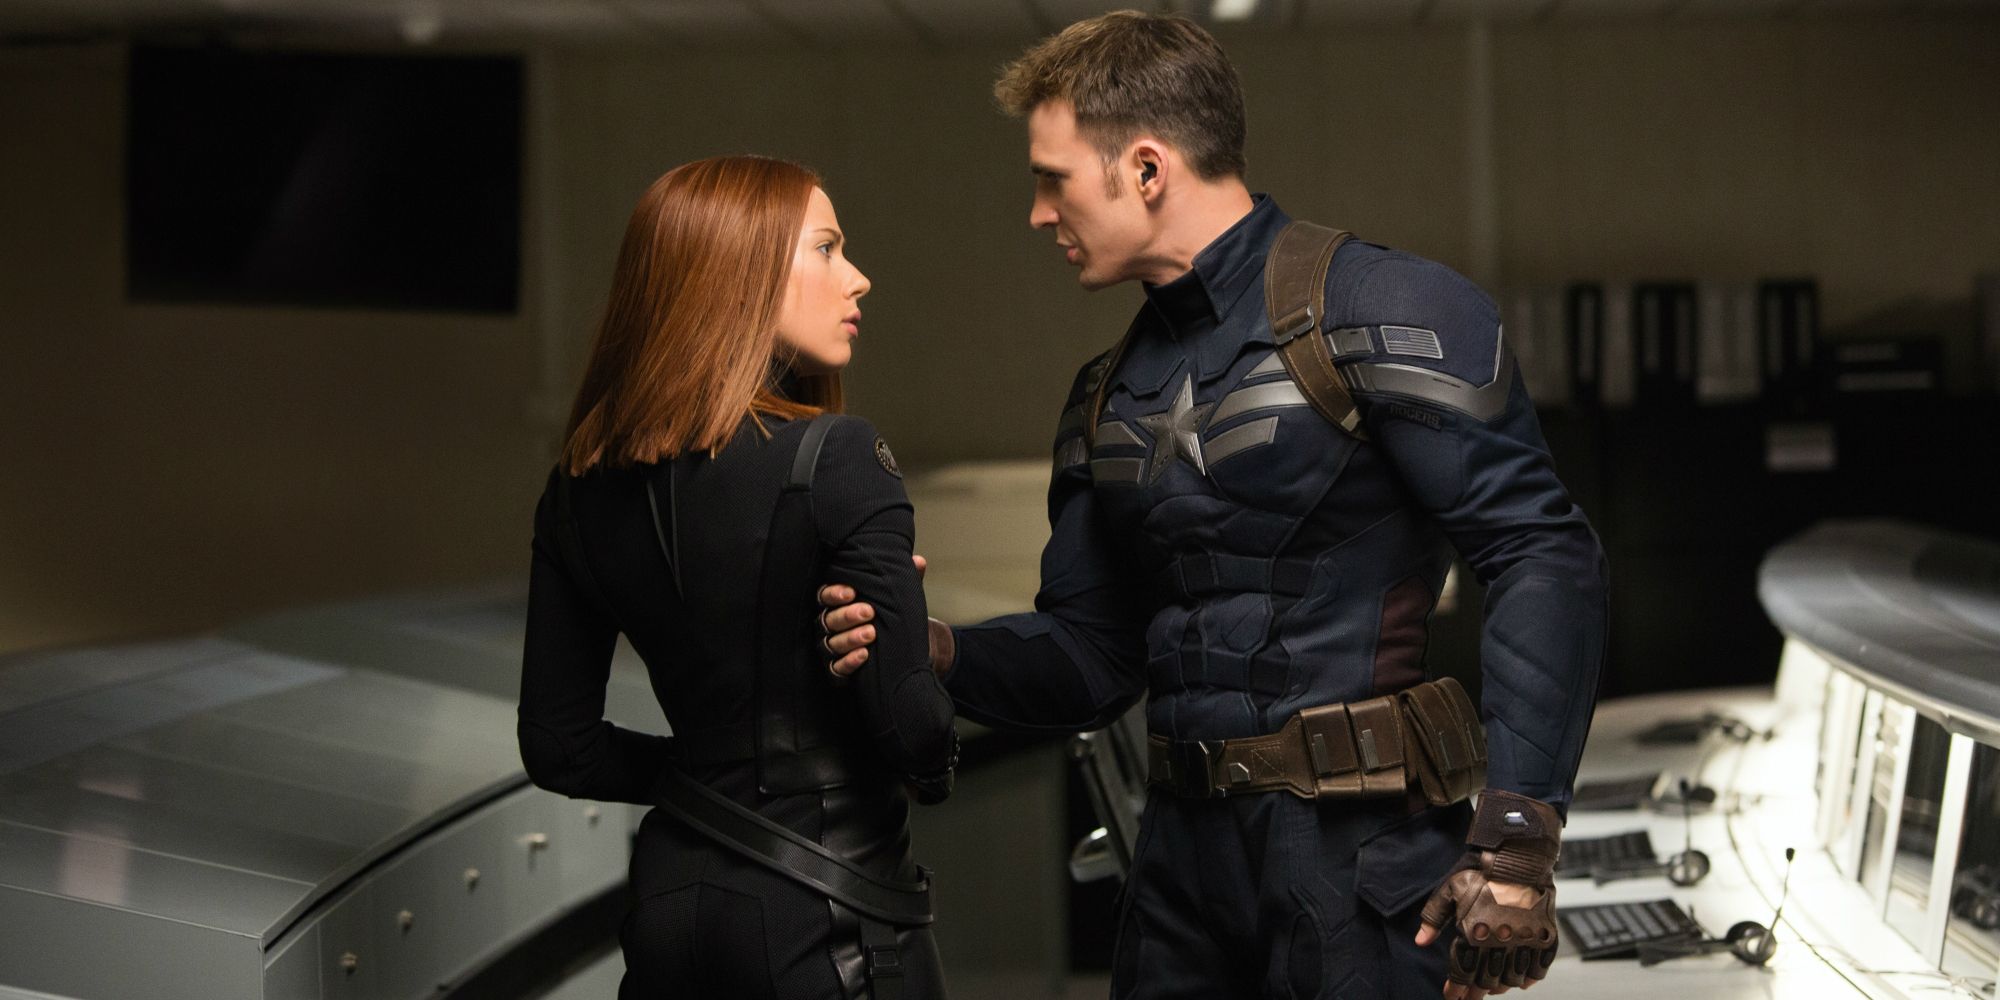 Scarlett Johansson as Black Widow and Chris Evans as Steve Rogers in Captain America The Winter Soldier